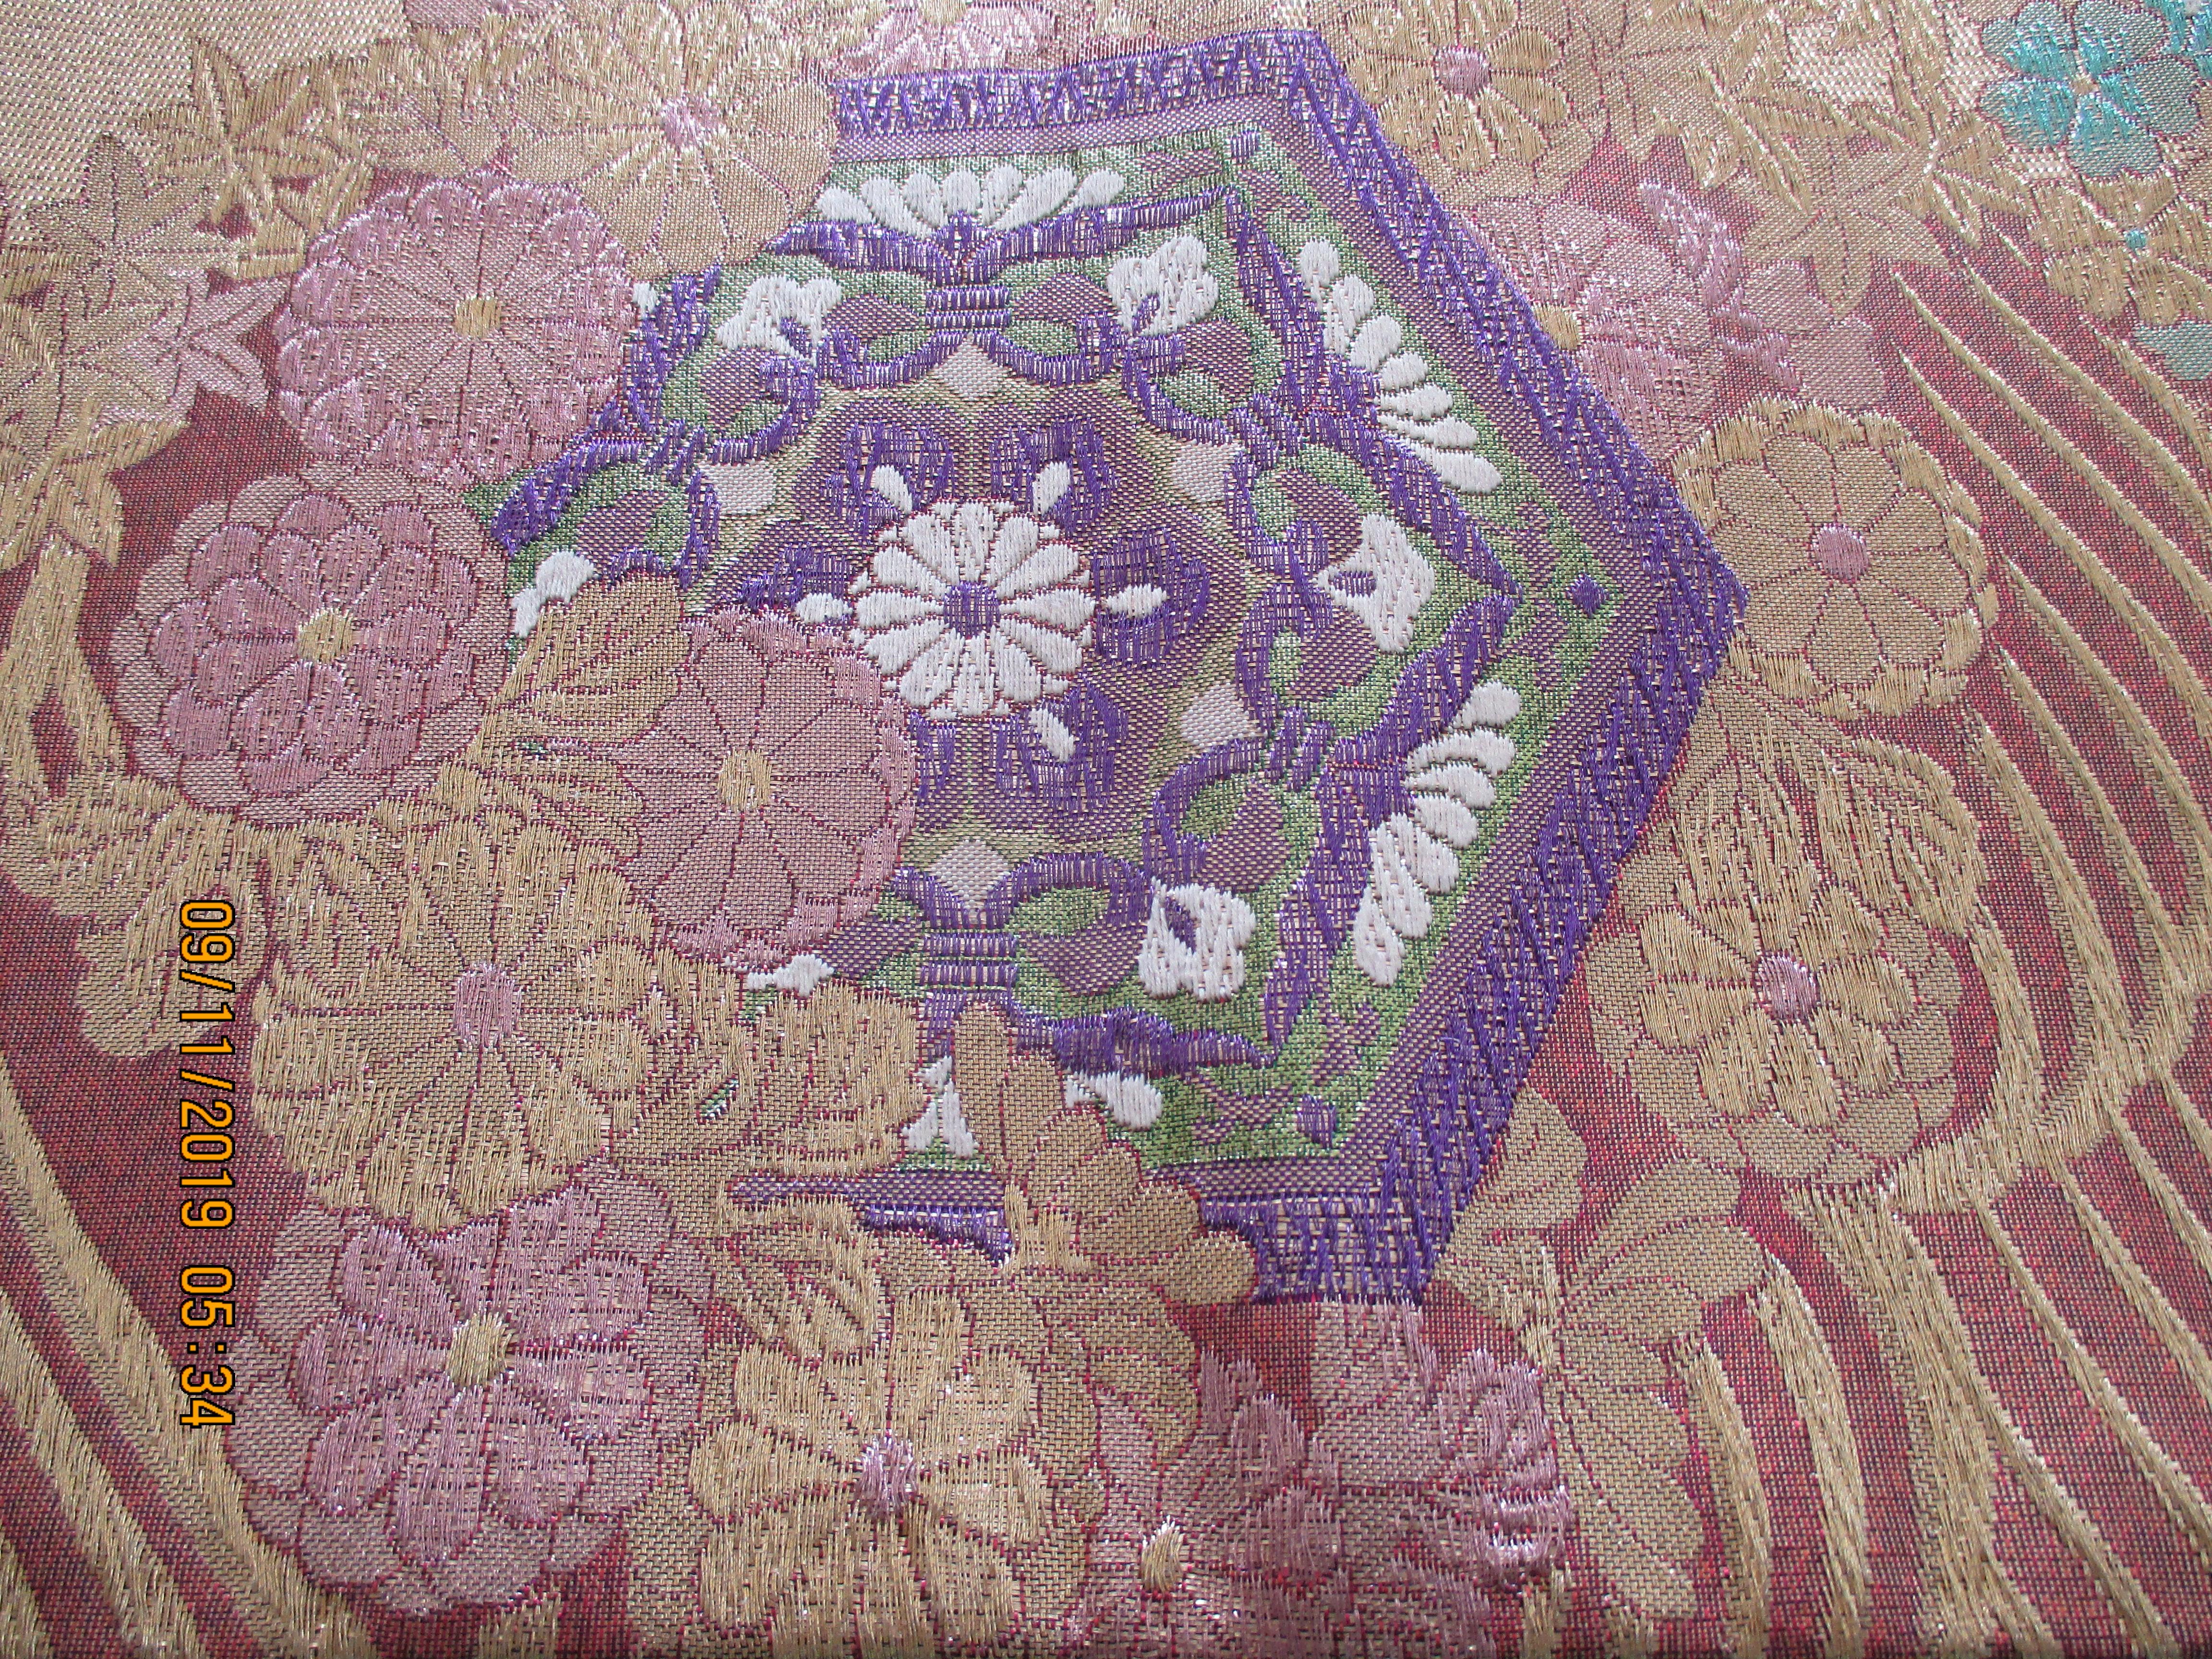 Golden textured woven Obi textile depicting flowers in bloom,
in shades of deep purple, gold, lavender, green, white, pink and aqua
Ideal for pillows or upholstery.
Size: 12